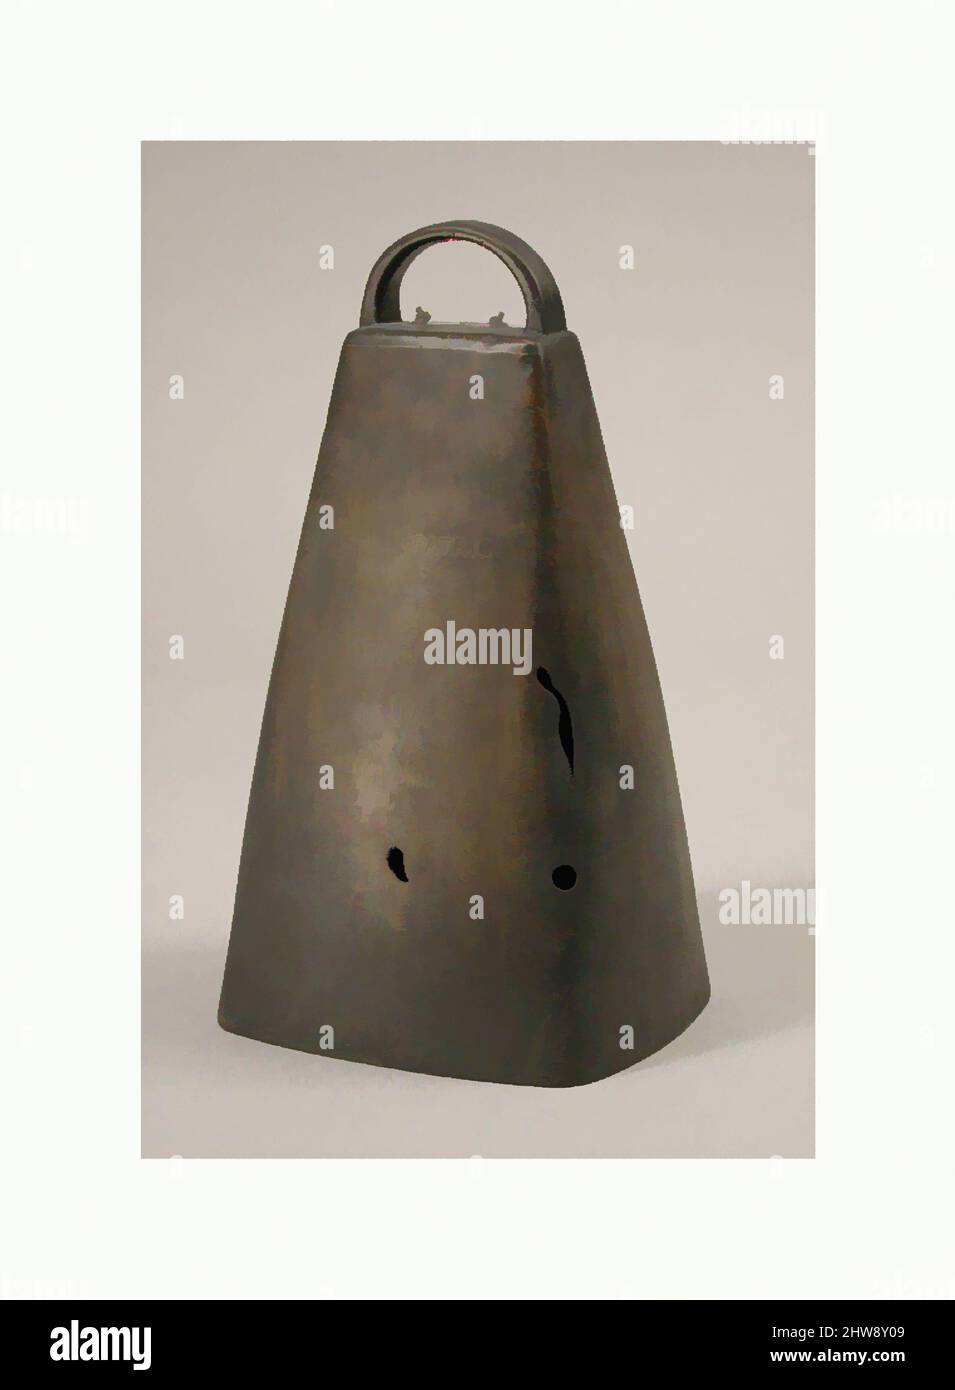 Art inspired by Bell of Clogher, early 20th century (original dated 5th century), Irish, Iron, bronze, Overall: 10 x 5 5/8 x 5in. (25.4 x 14.3 x 12.7cm), Reproductions-Metalwork, Classic works modernized by Artotop with a splash of modernity. Shapes, color and value, eye-catching visual impact on art. Emotions through freedom of artworks in a contemporary way. A timeless message pursuing a wildly creative new direction. Artists turning to the digital medium and creating the Artotop NFT Stock Photo